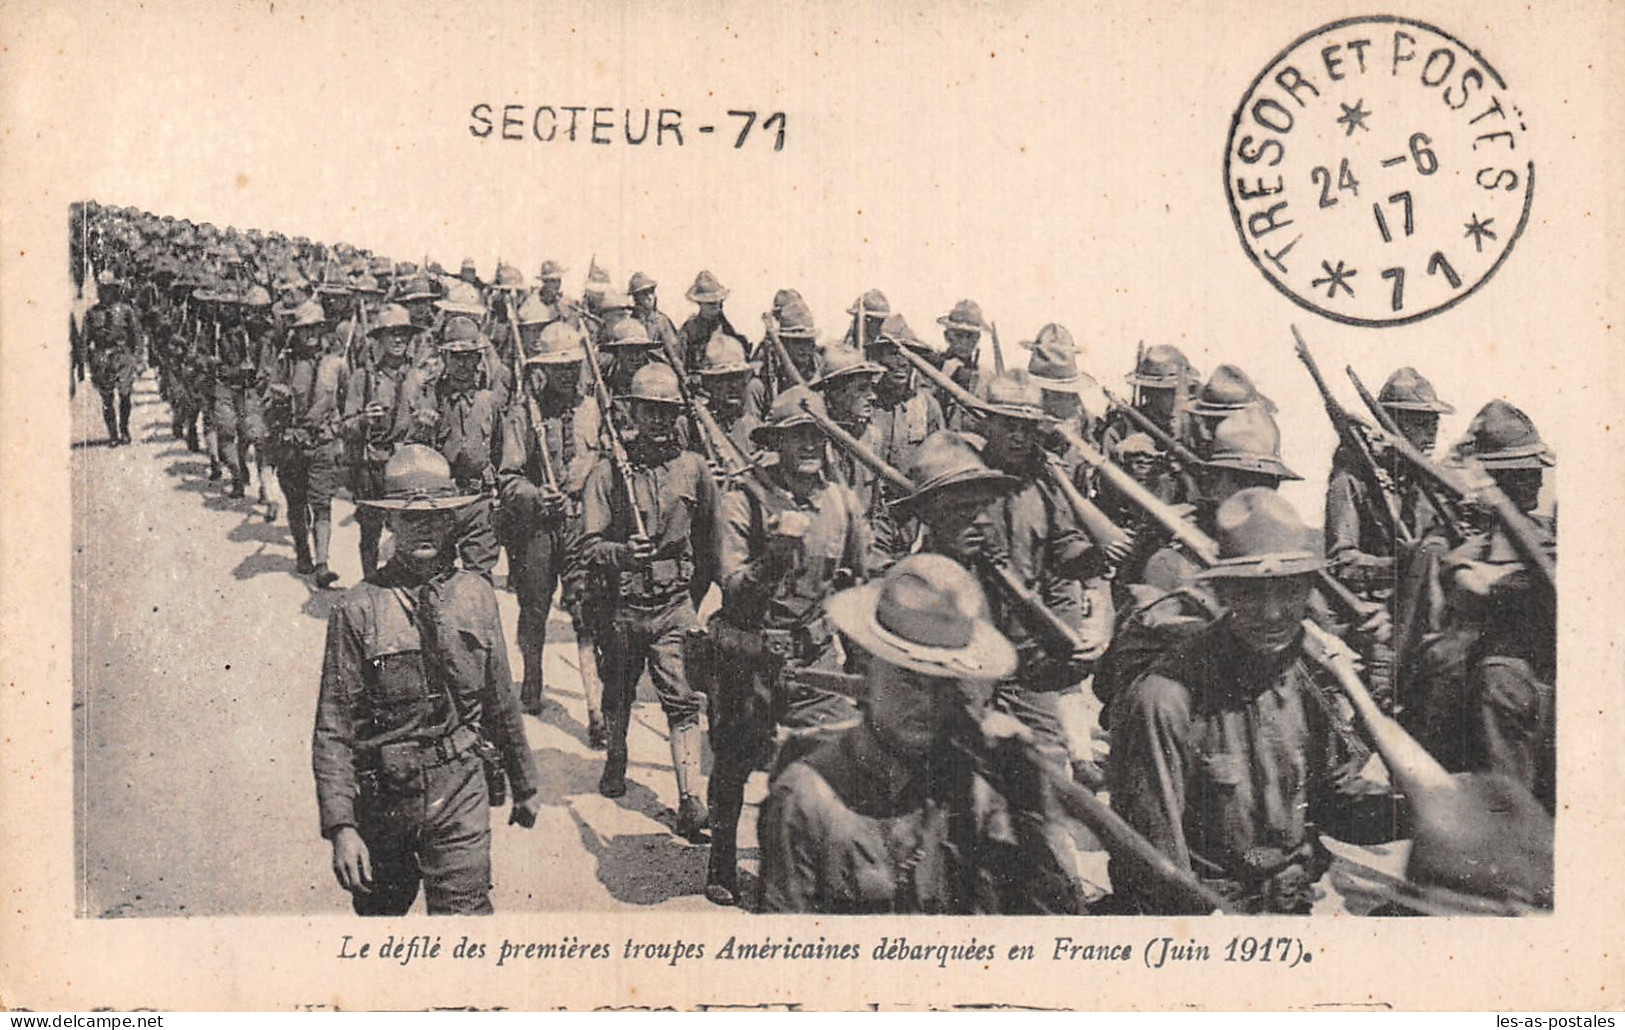  THEME MILITARIA TROUPE AMERICAINES DEBARQUEES EN France  - Personnages